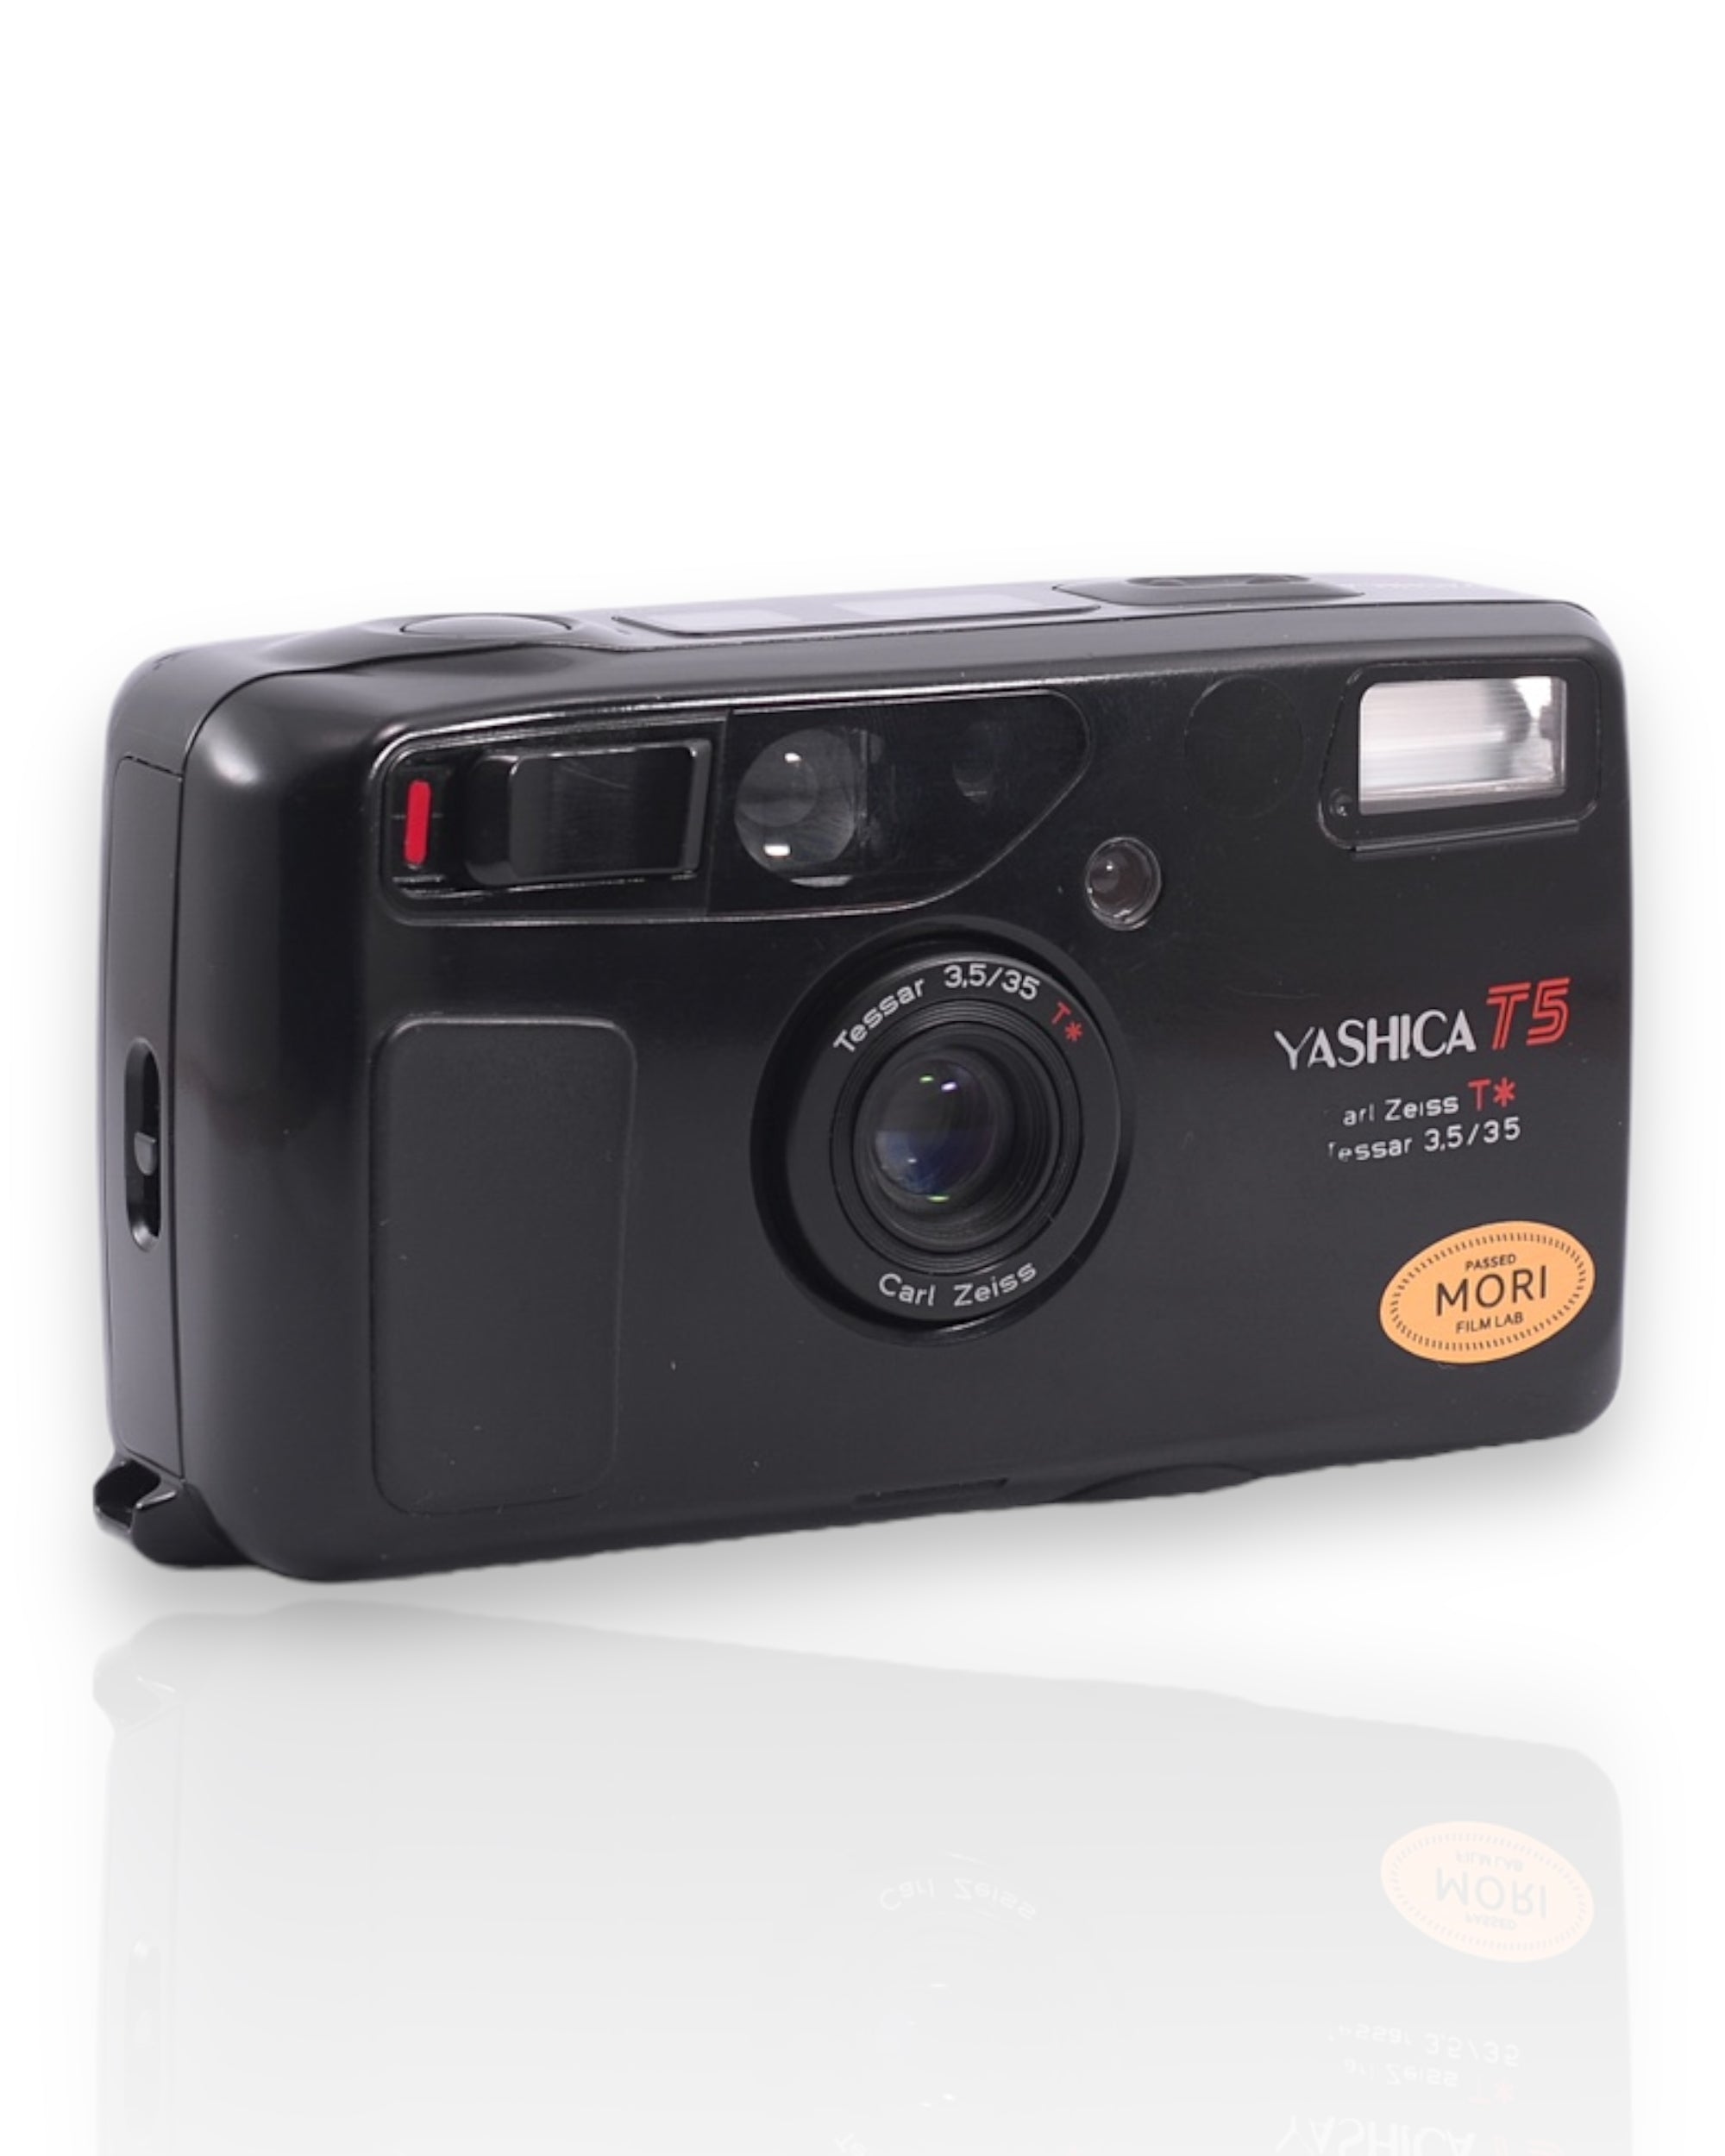 Yashica T5 35mm point & shoot film camera with 35mm f3.5 lens